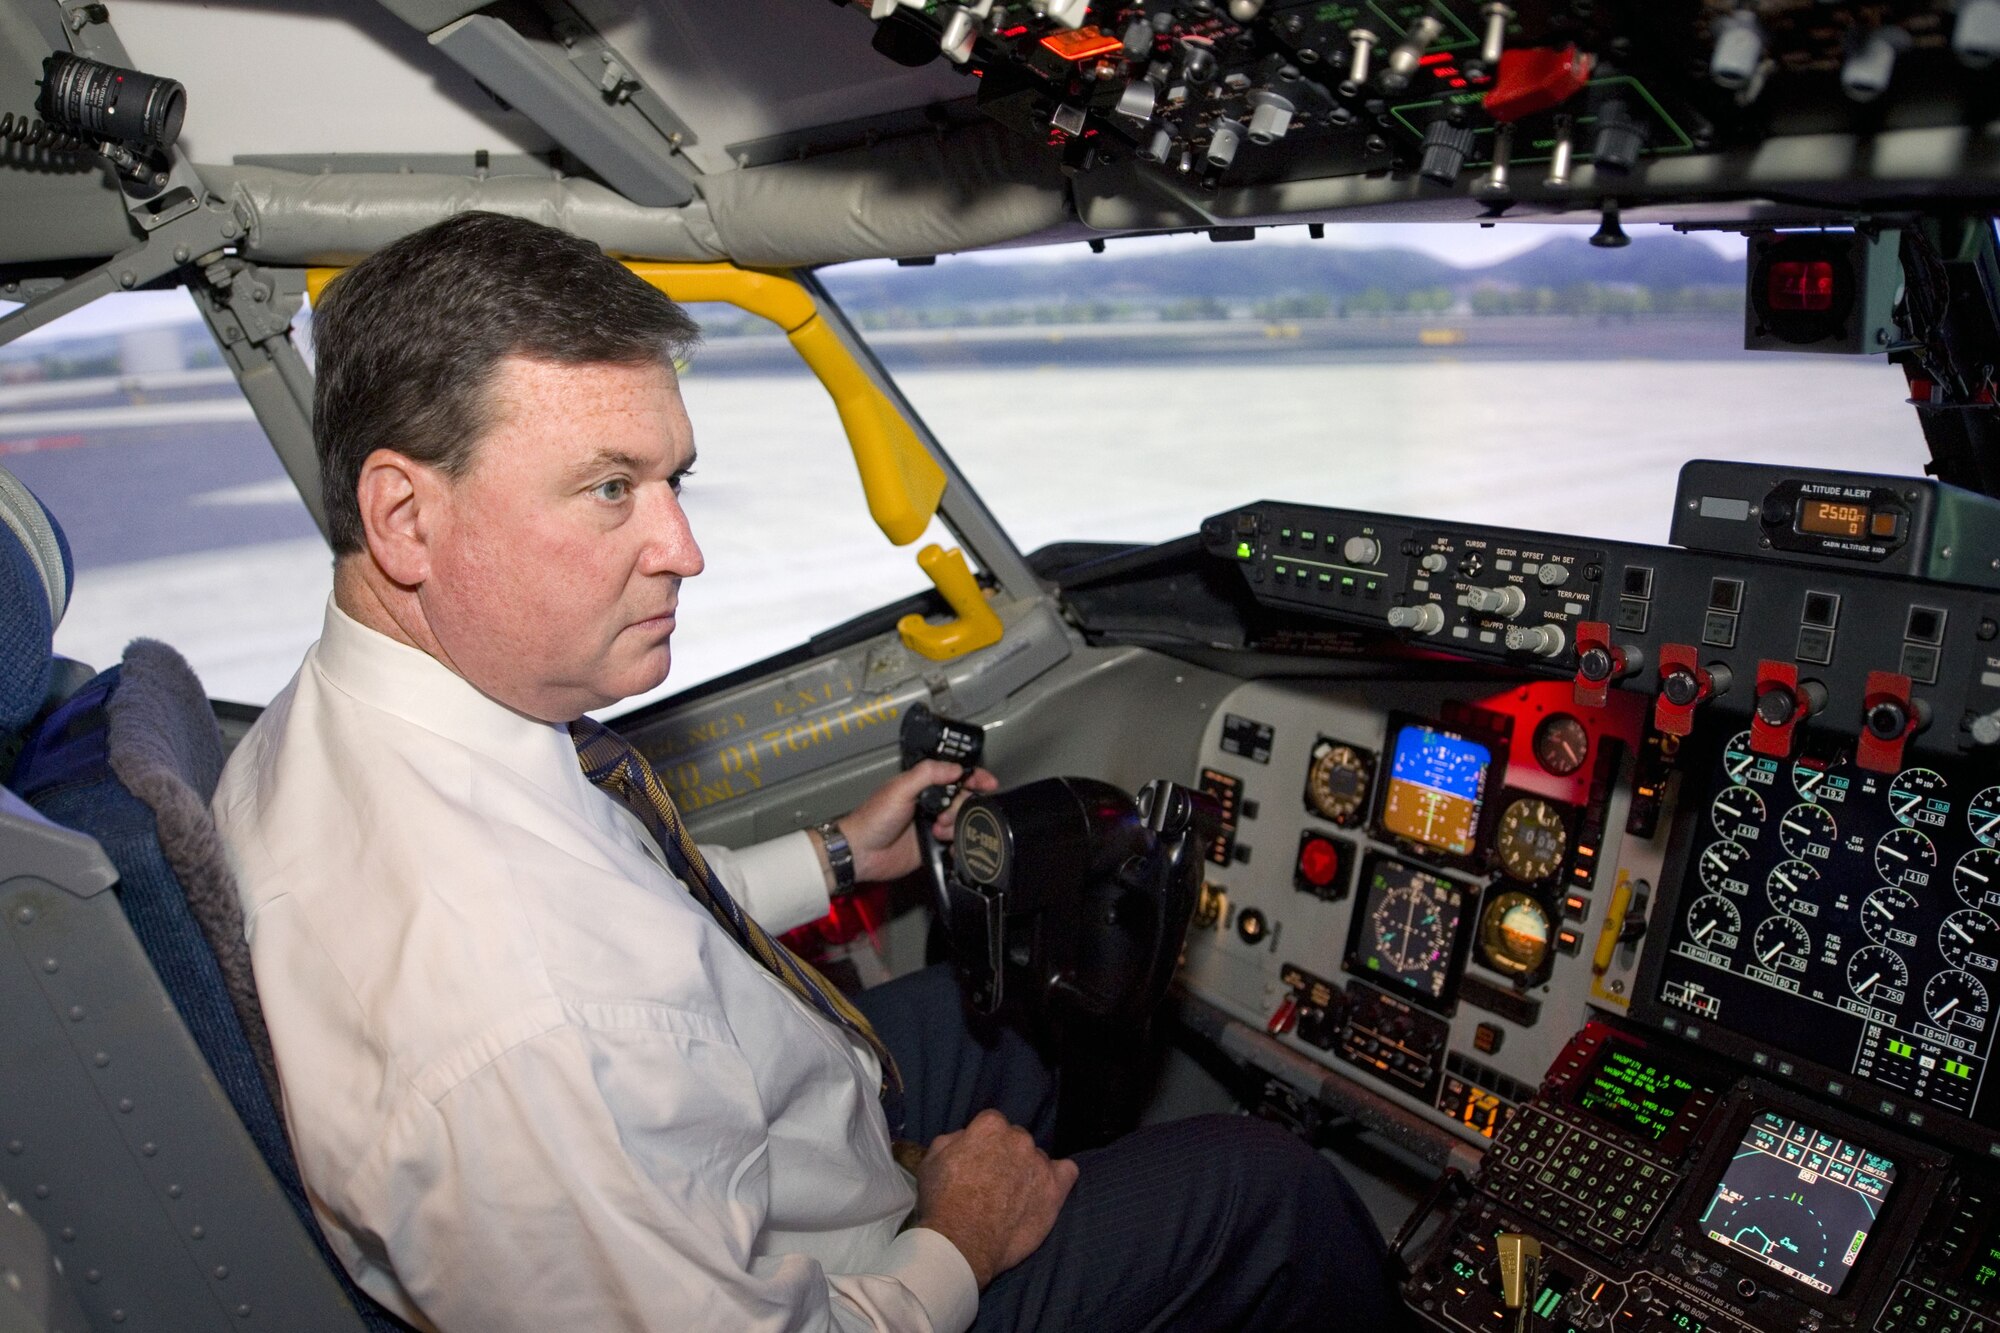 U.S. Rep. Todd Rokita operates the controls of a KC-135R Stratotanker simulator during his visit to Grissom Air Reserve Base, Ind., Nov. 21, 2017. Rokita and his staff visited Grissom to learn more about the base and its role in both national defense and the Indiana economy. (U.S. Air Force graphic/Tech. Sgt. Benjamin Mota)